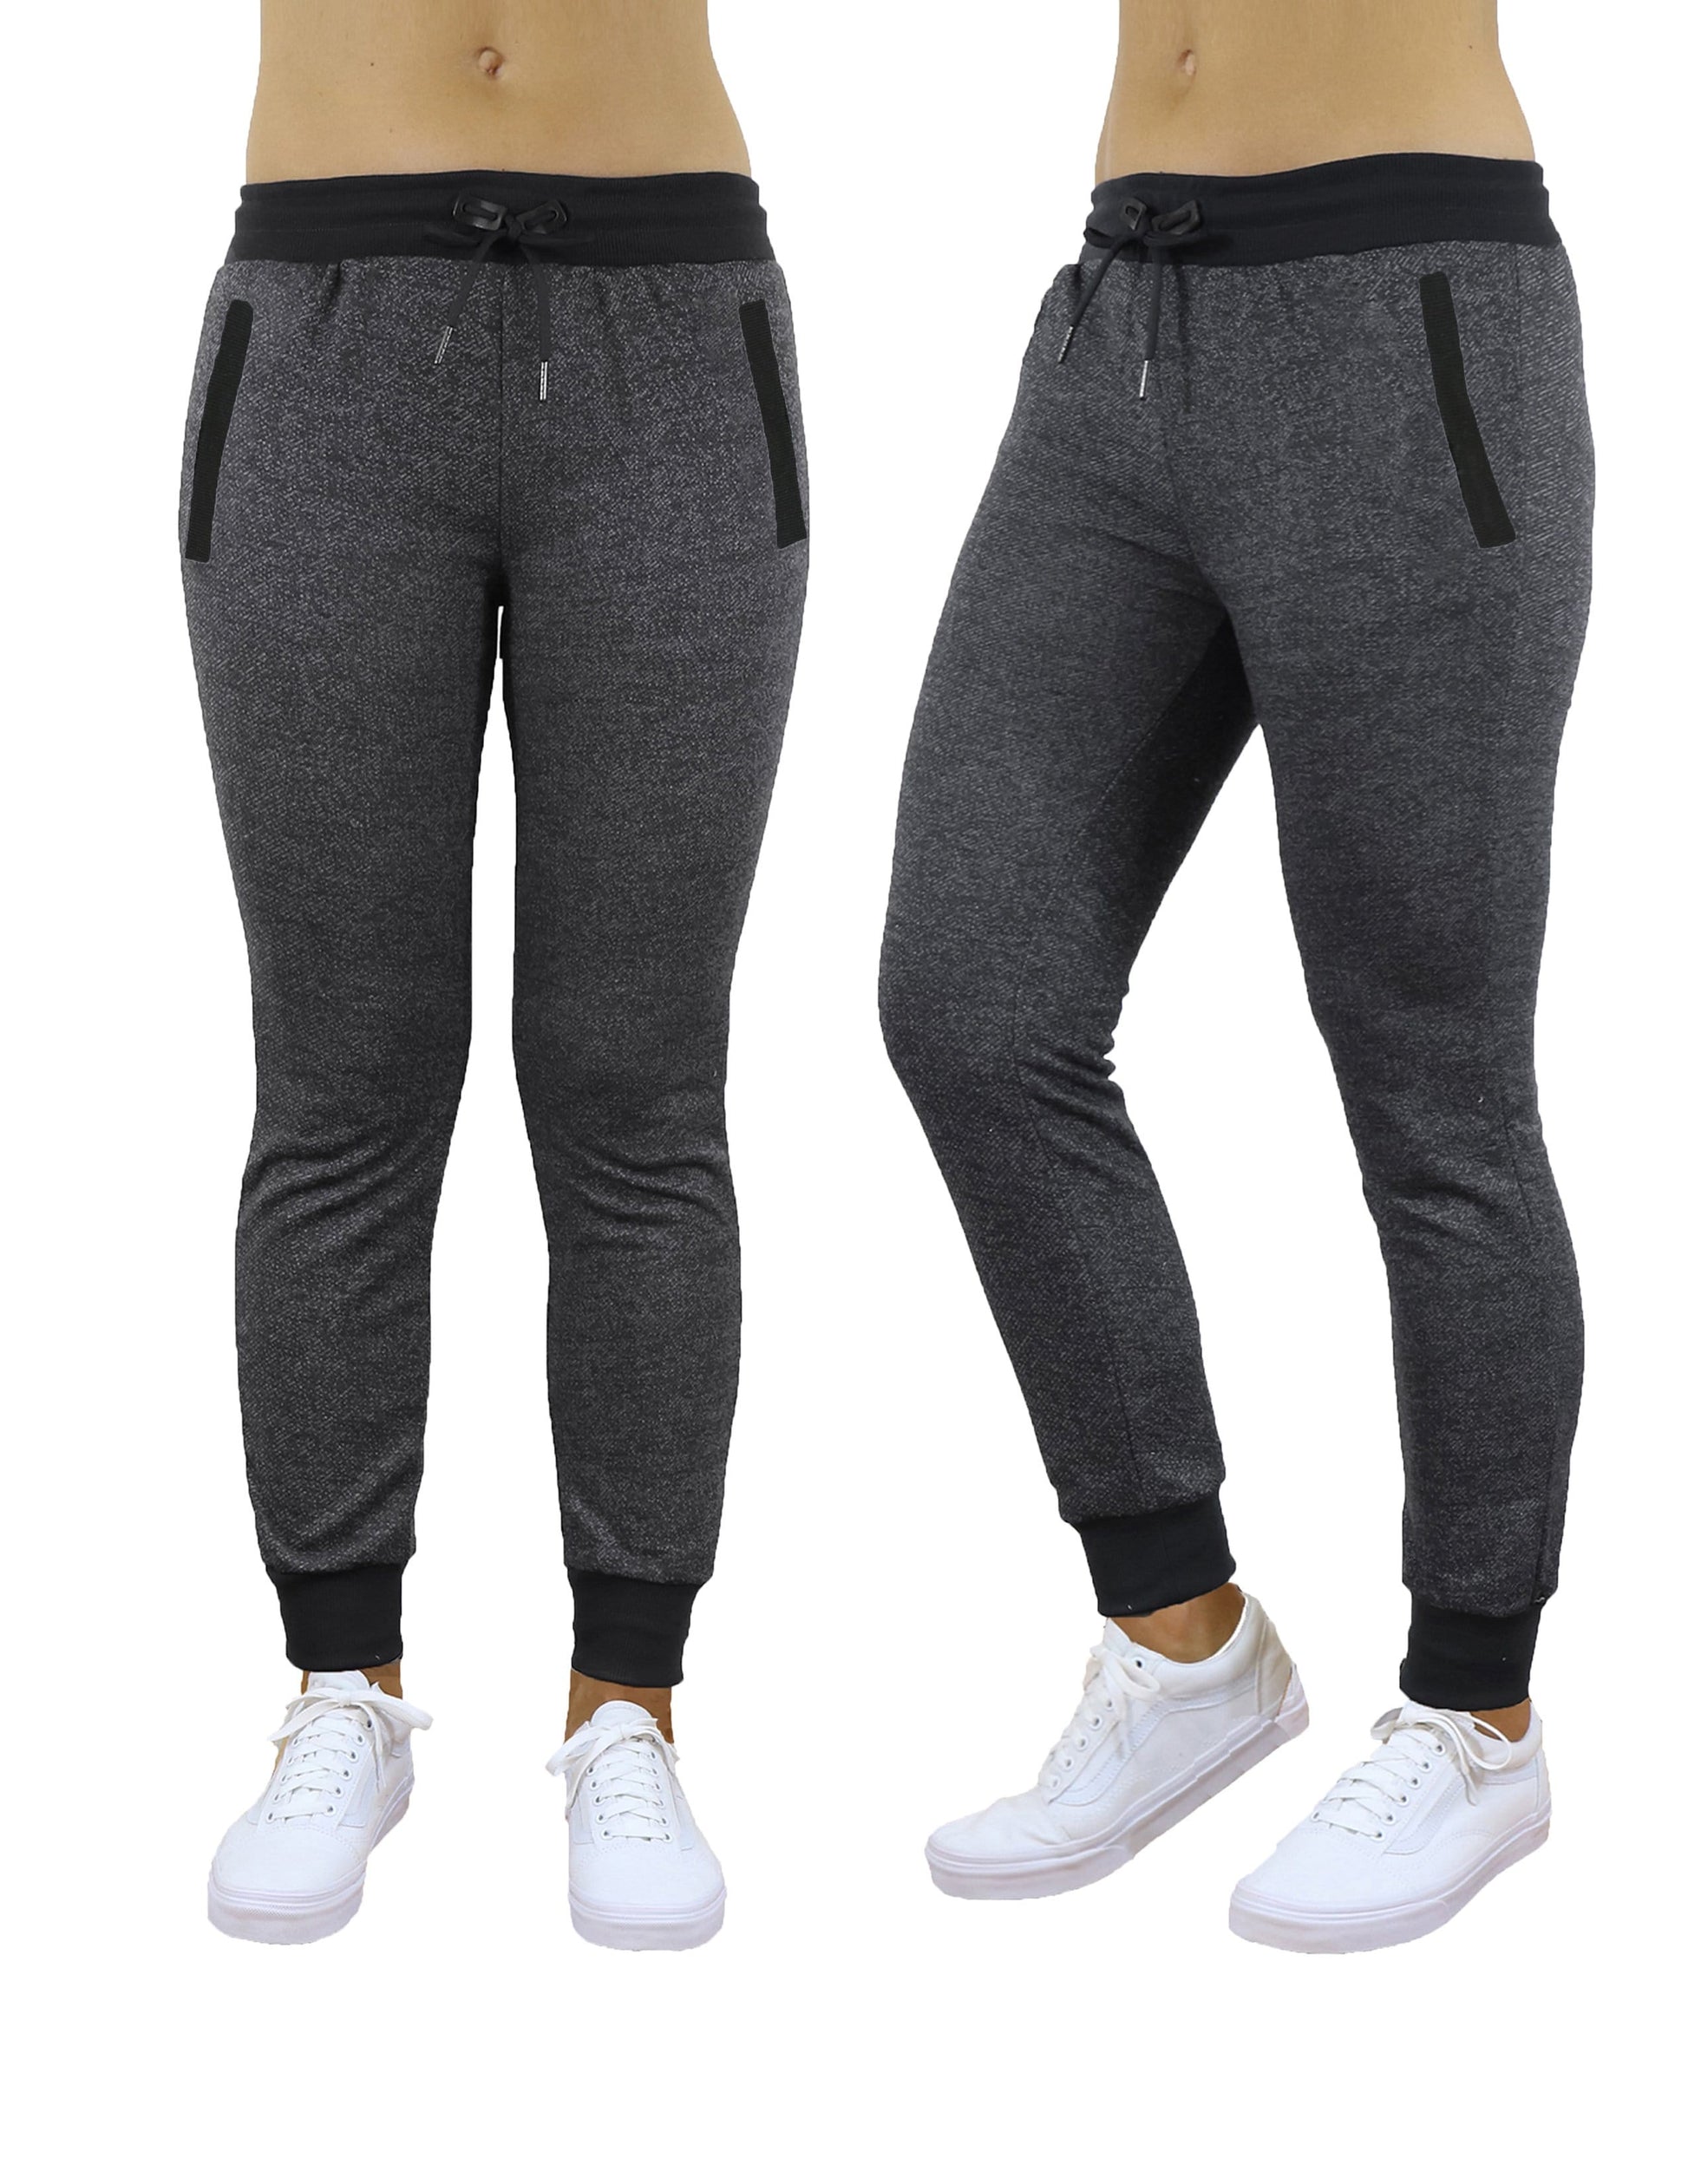 Women's Slim-Fit French-Terry Jogger Sweatpants - GalaxybyHarvic